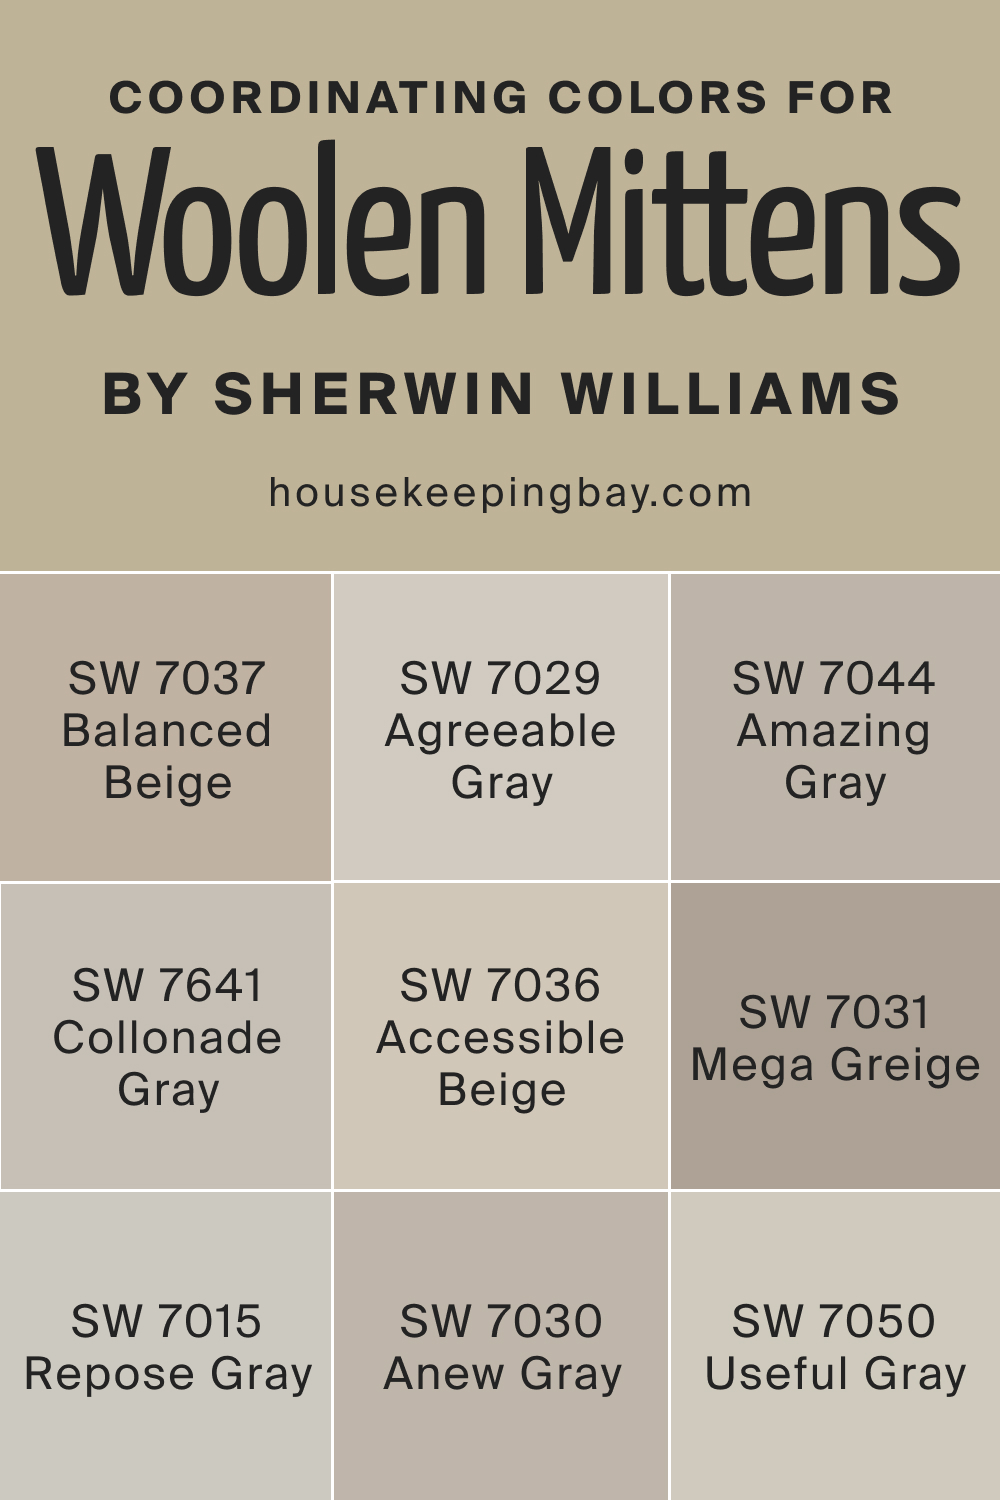 Coordinating Colors for SW 9526 Woolen Mittens by Sherwin Williams